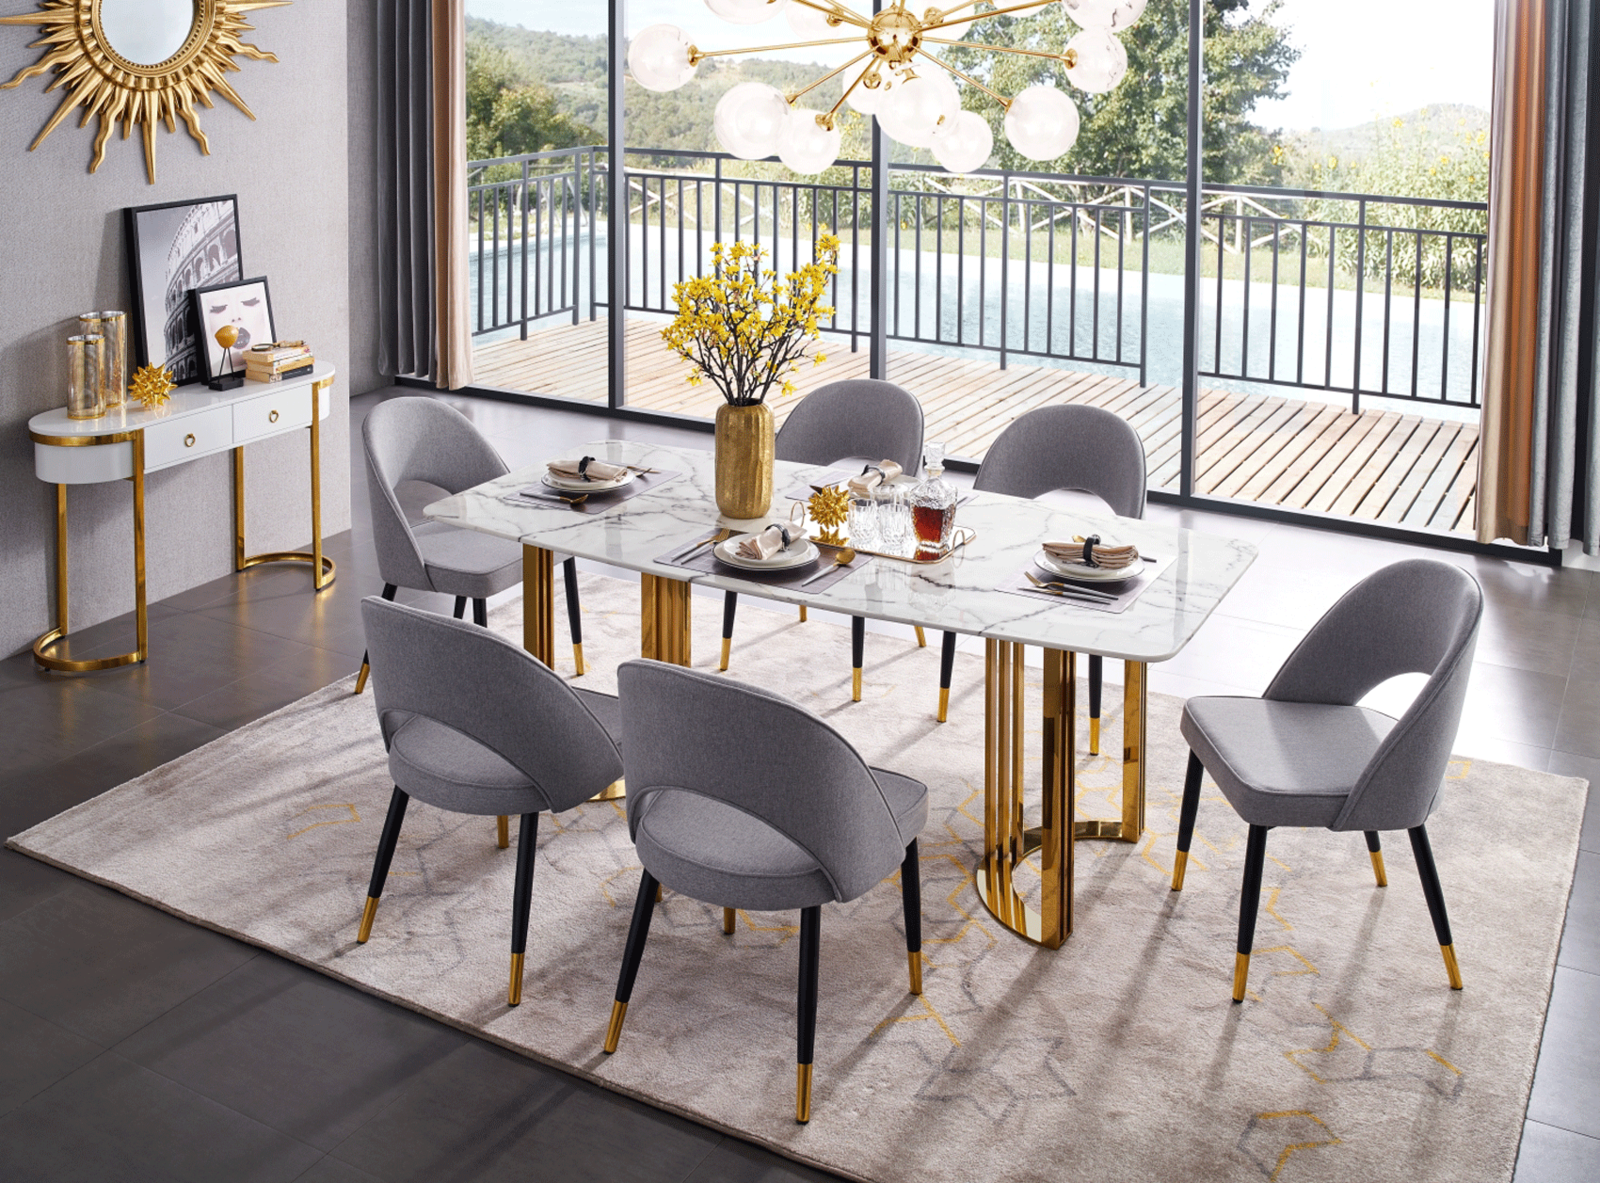 7 Piece Dining Set with Marble Top Table - $2,899.00 - $3,999.00